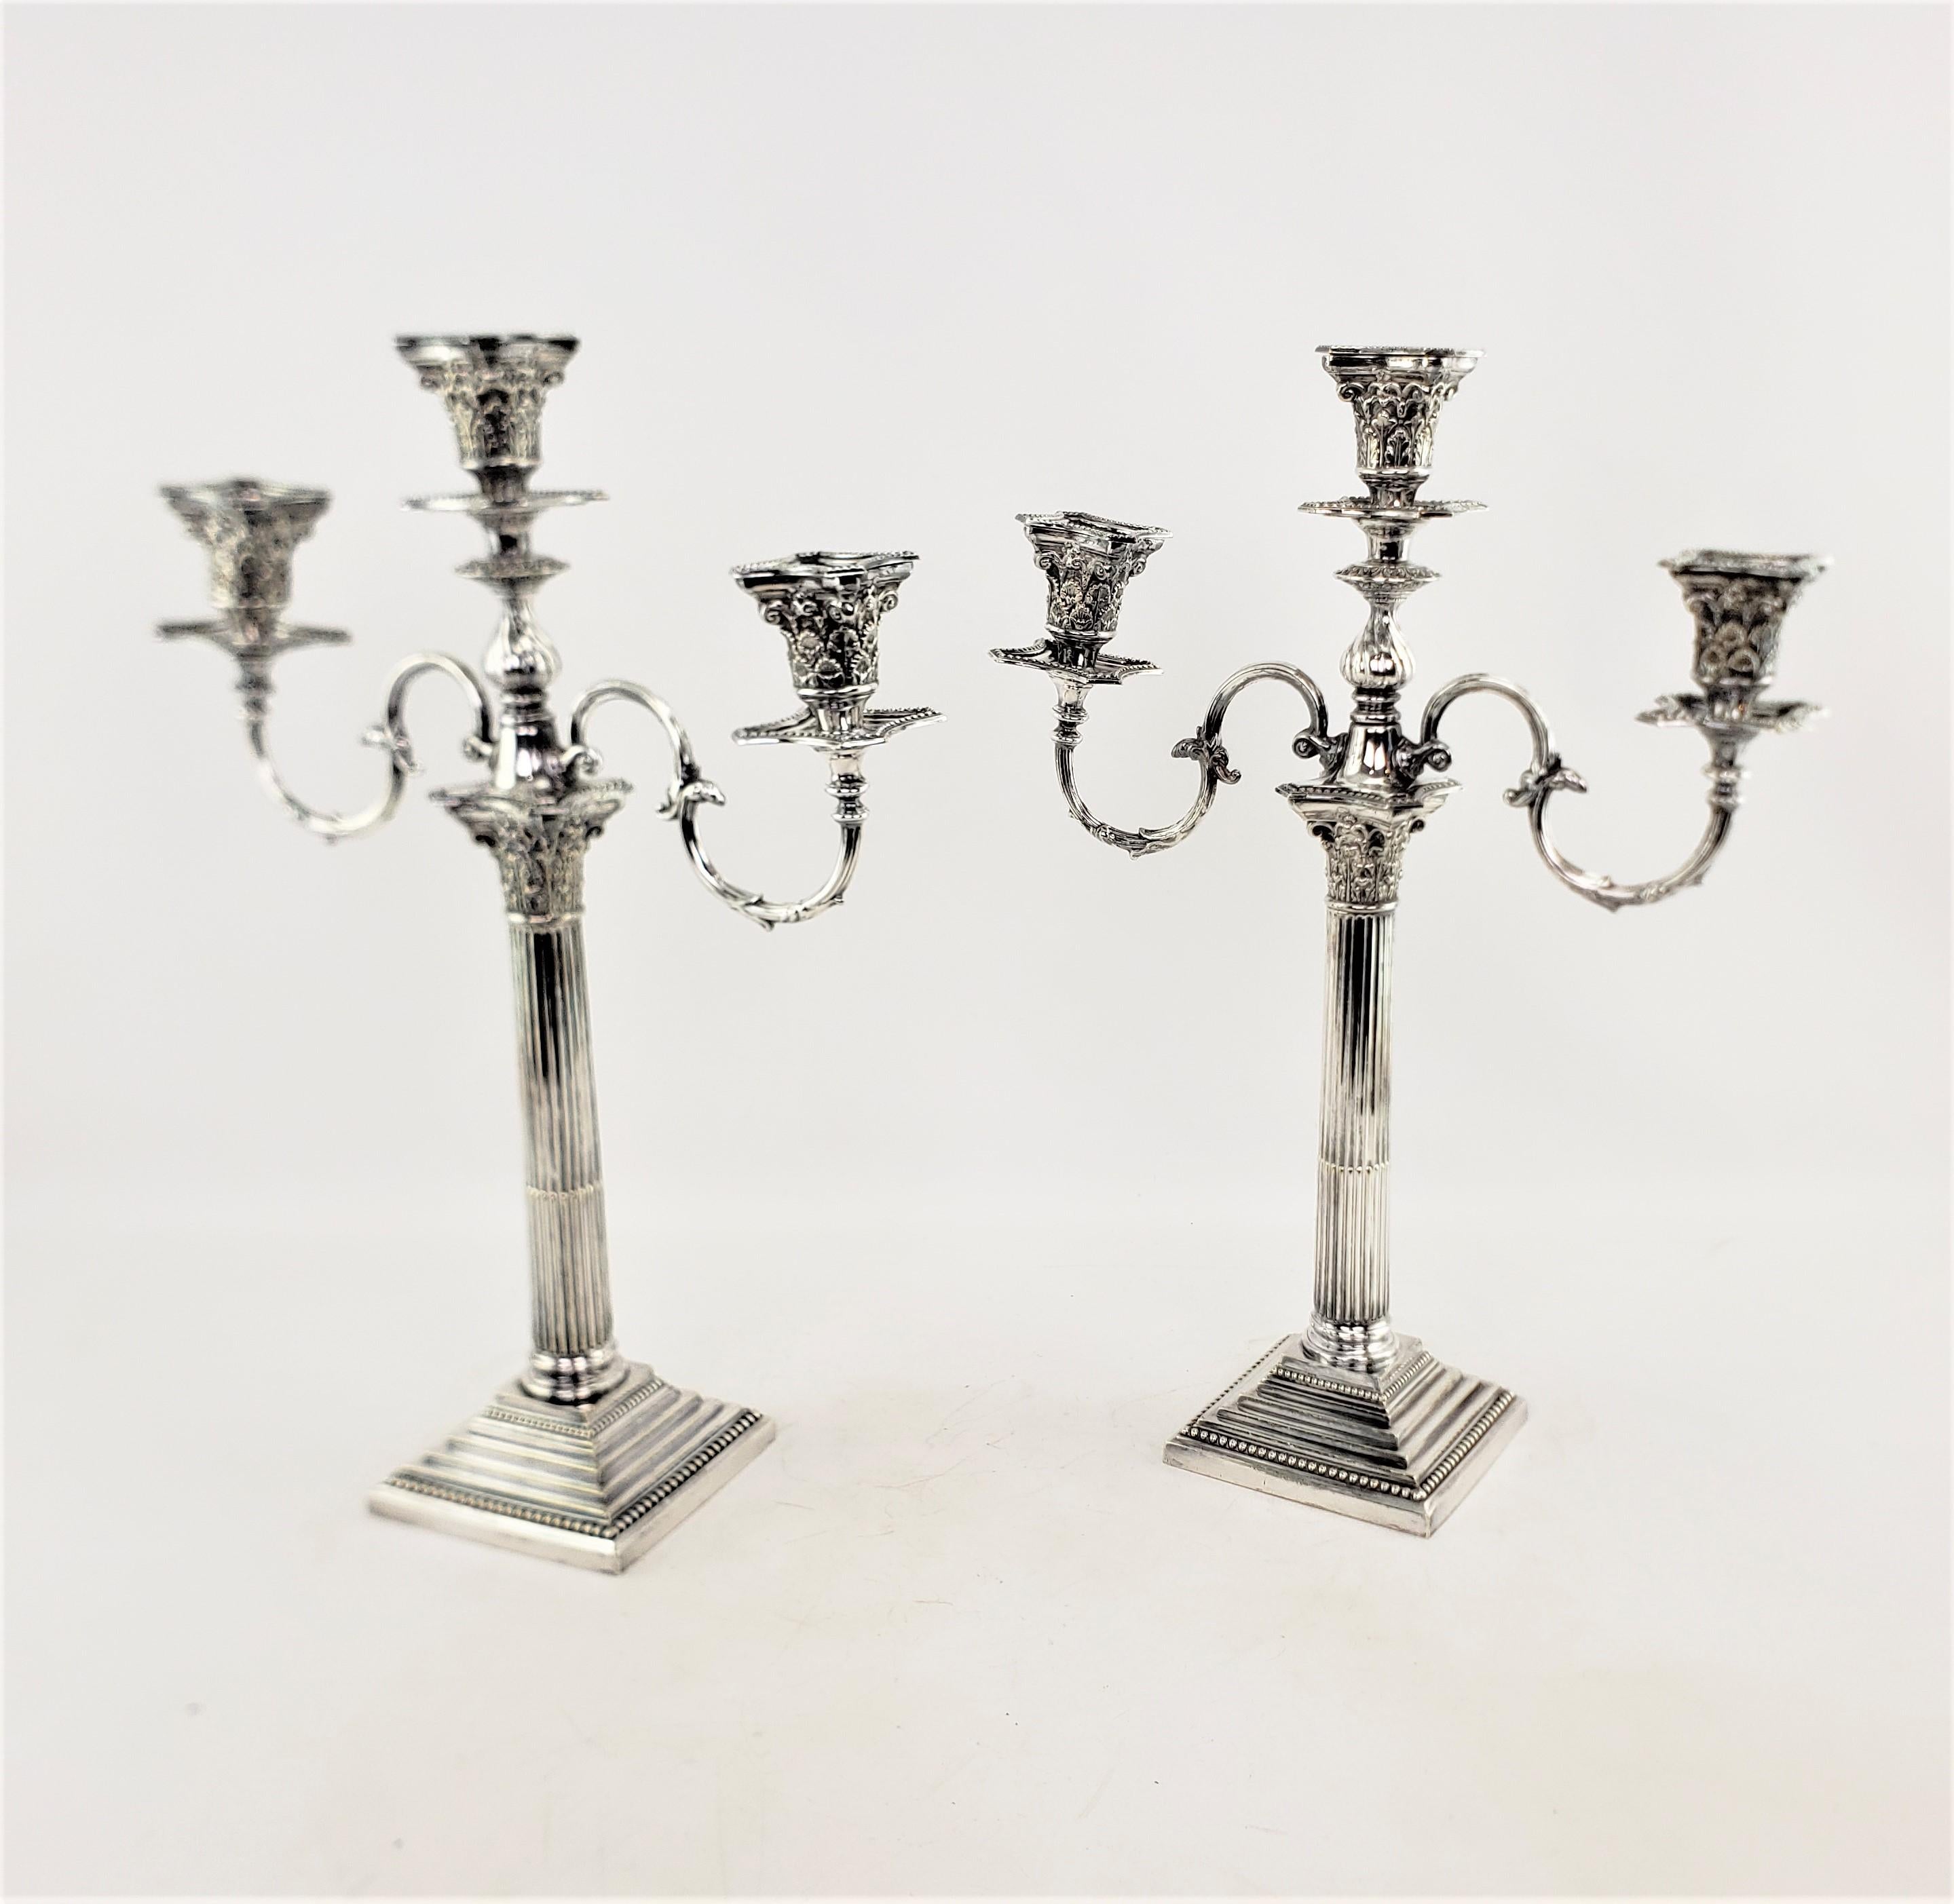 20th Century Pair of Antique Mappin & Webb Convertible Candelabras in Corinthian Column Style For Sale